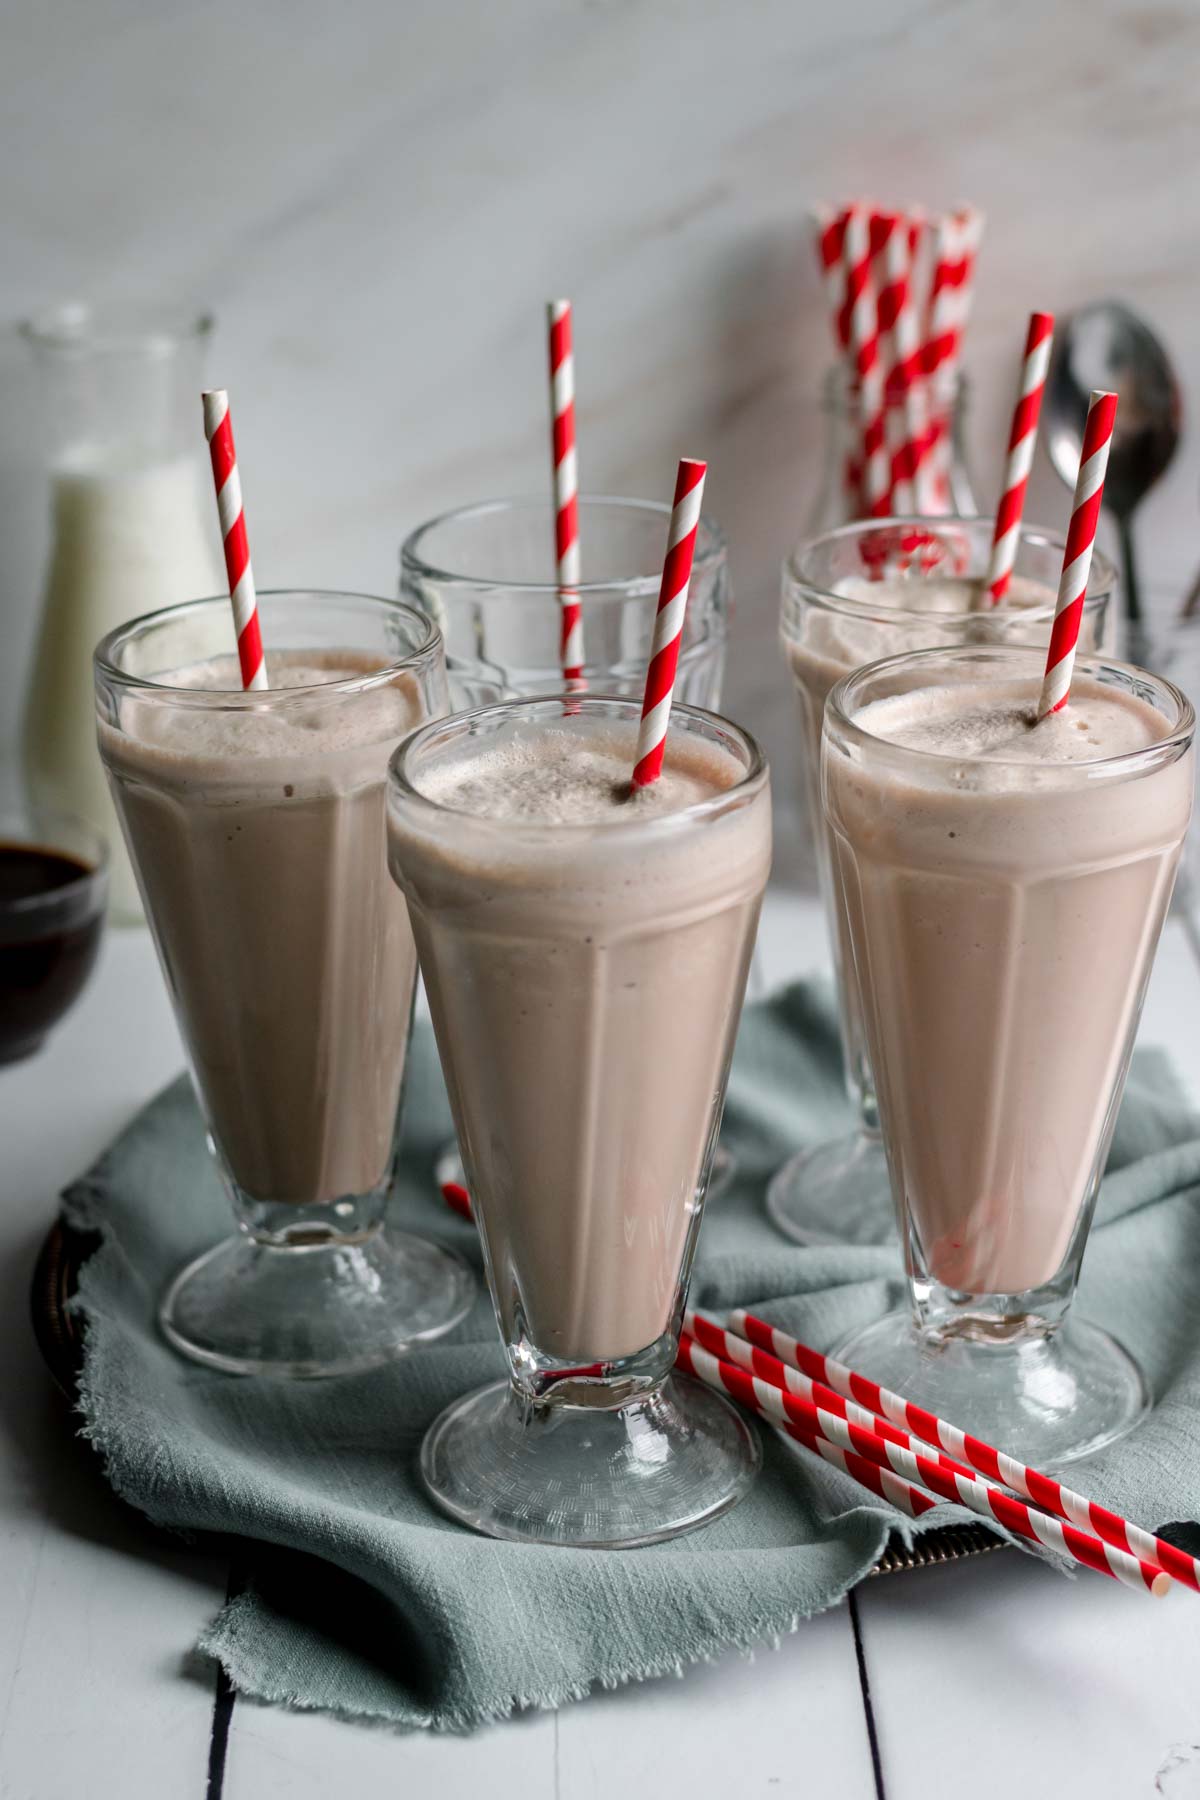 Wendy's Chocolate Frosty group in serving glasses